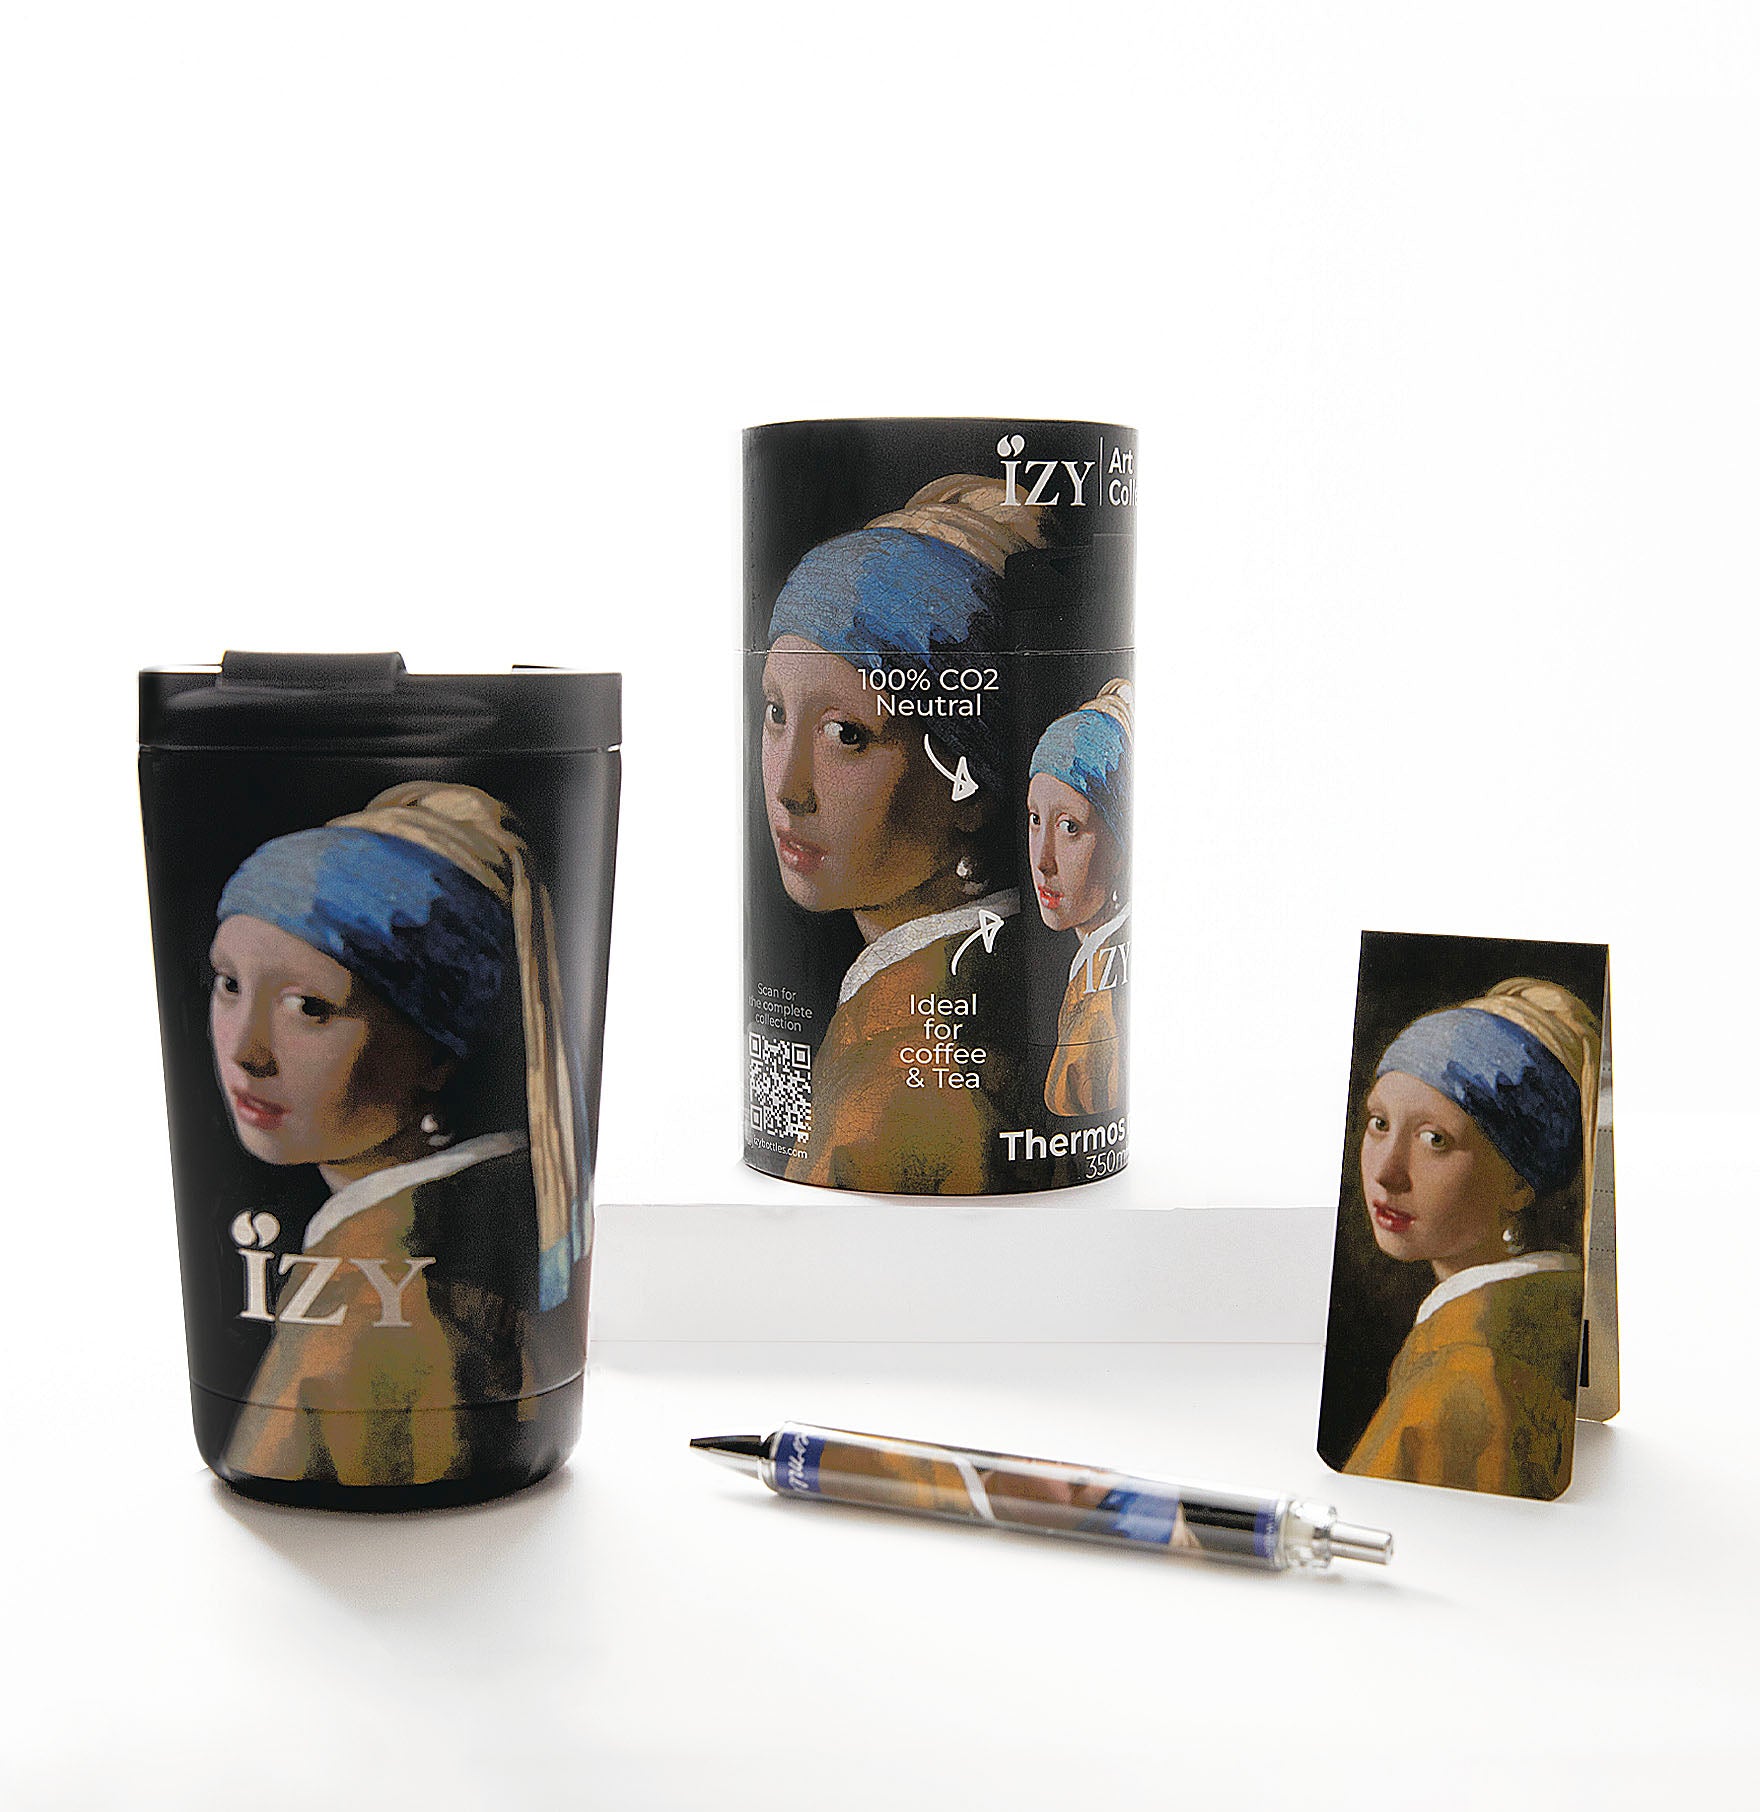 Shop Now Holland's Museum Souvenir Gift Sets! Vermeer's 'Girl with a Pearl Earring' Quality IZY Thermo Mug  Museum Gift Set  + Free Gift!